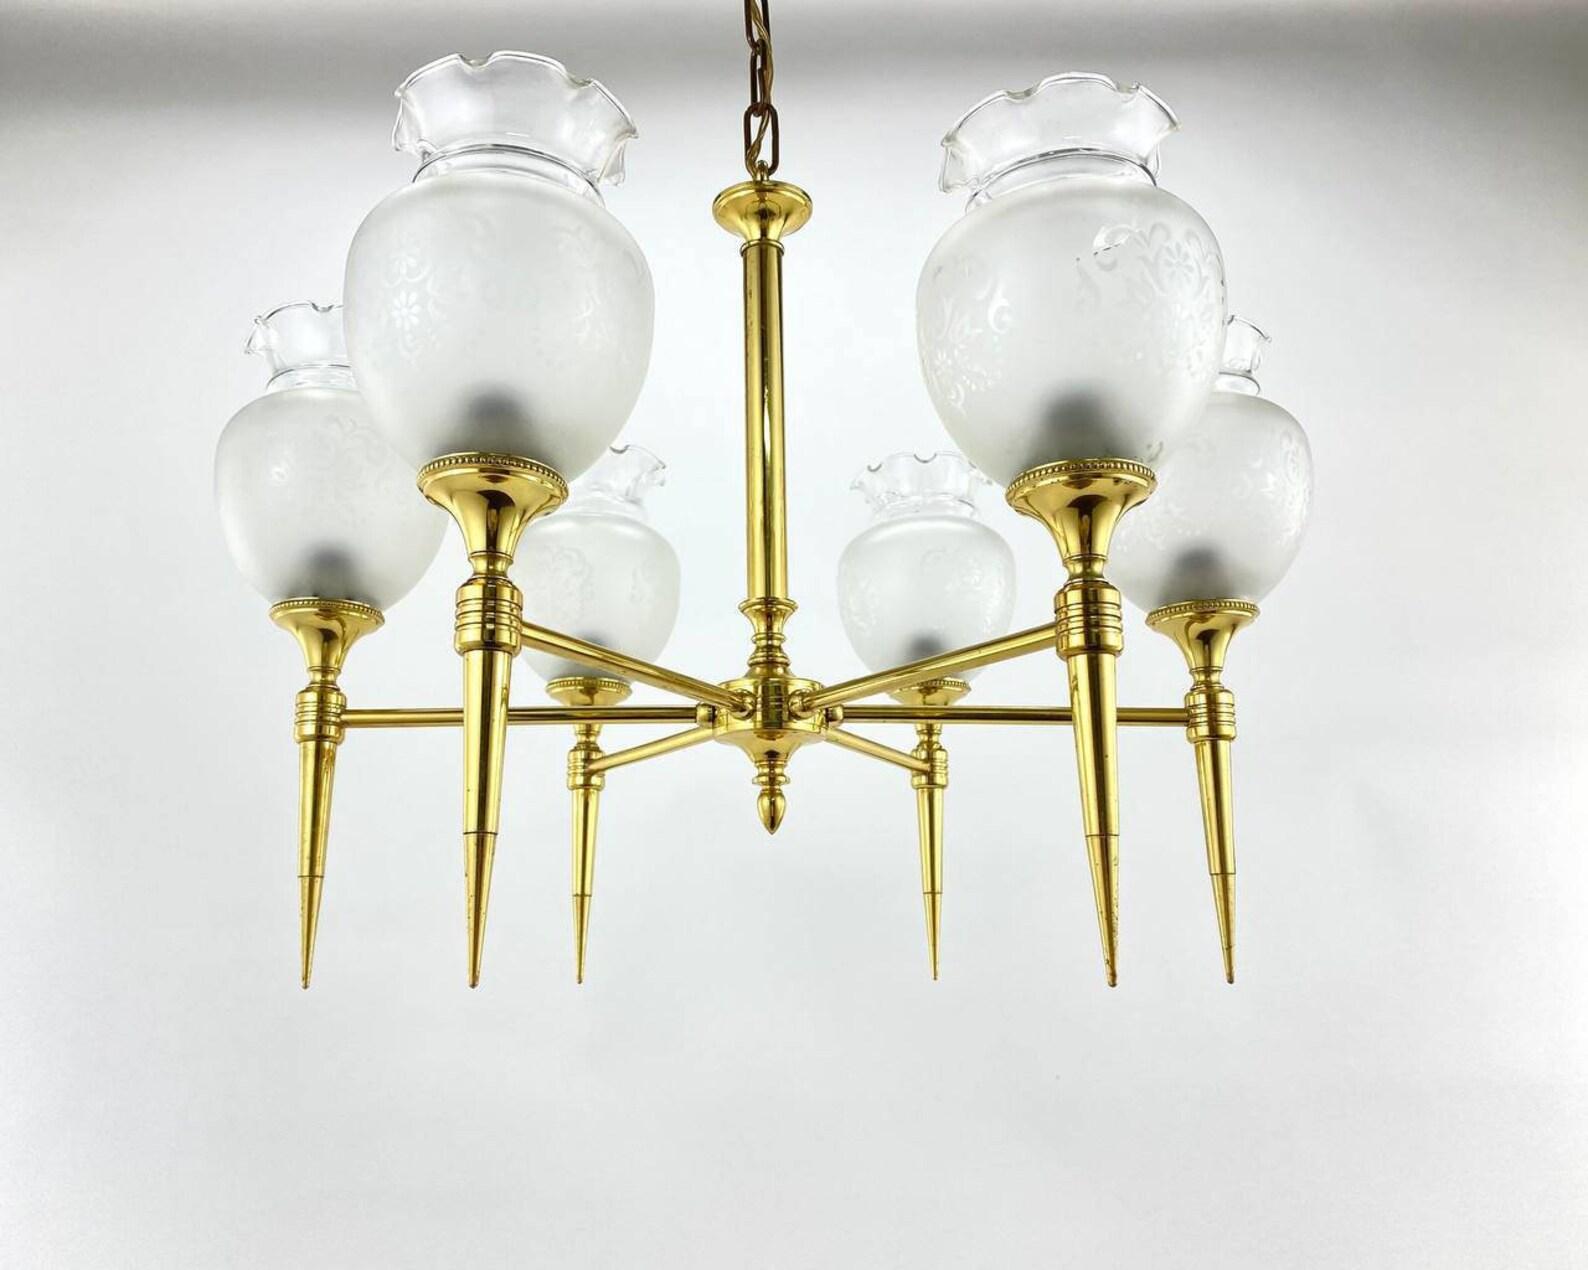 Vintage 6 Light Chandelier Brass and Frosted Glass Ceiling Lamp, France, 1970 For Sale 2